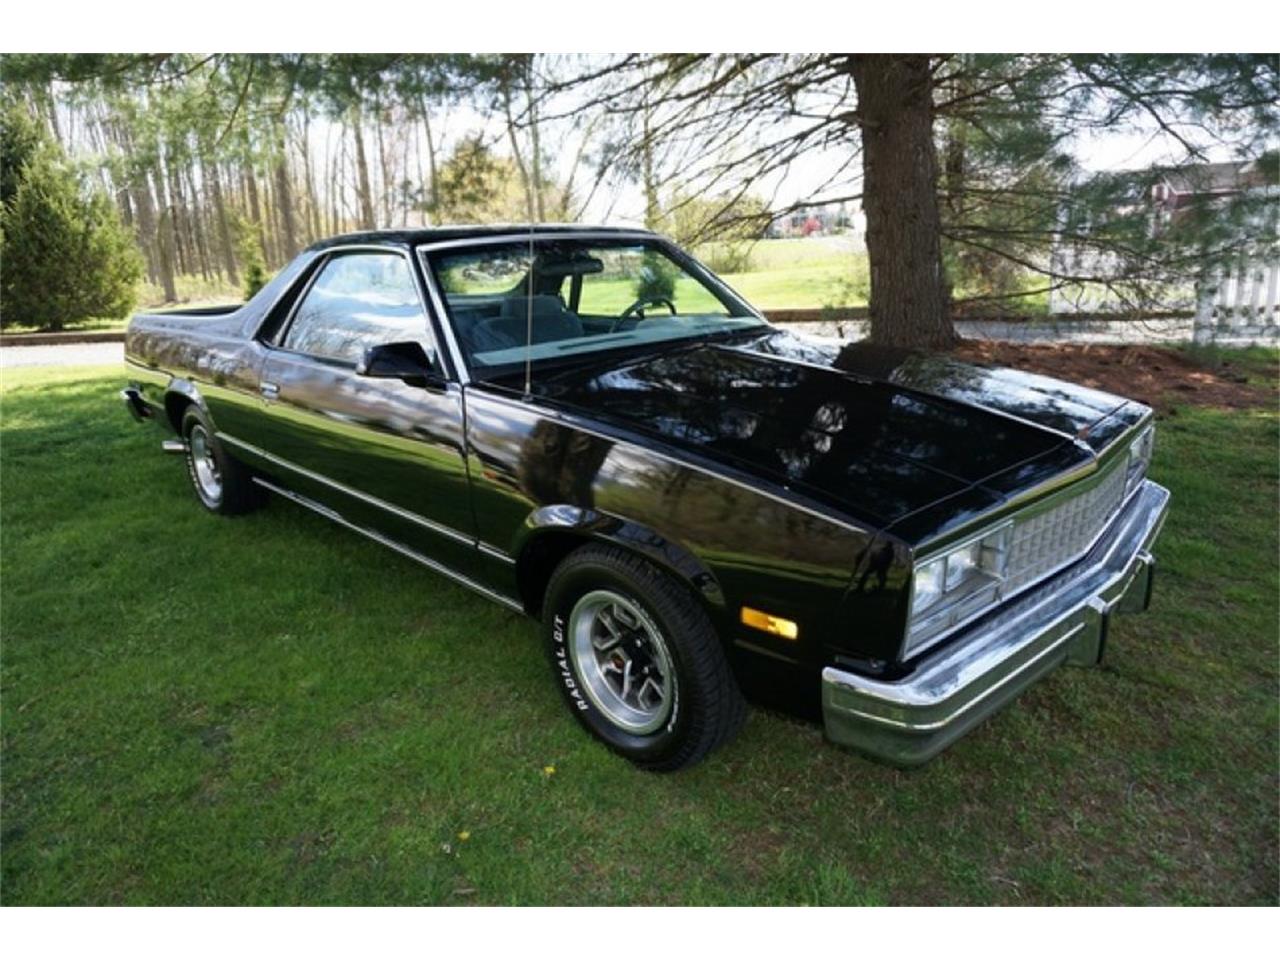 are there any 2000 or newer chevy el camino for sale